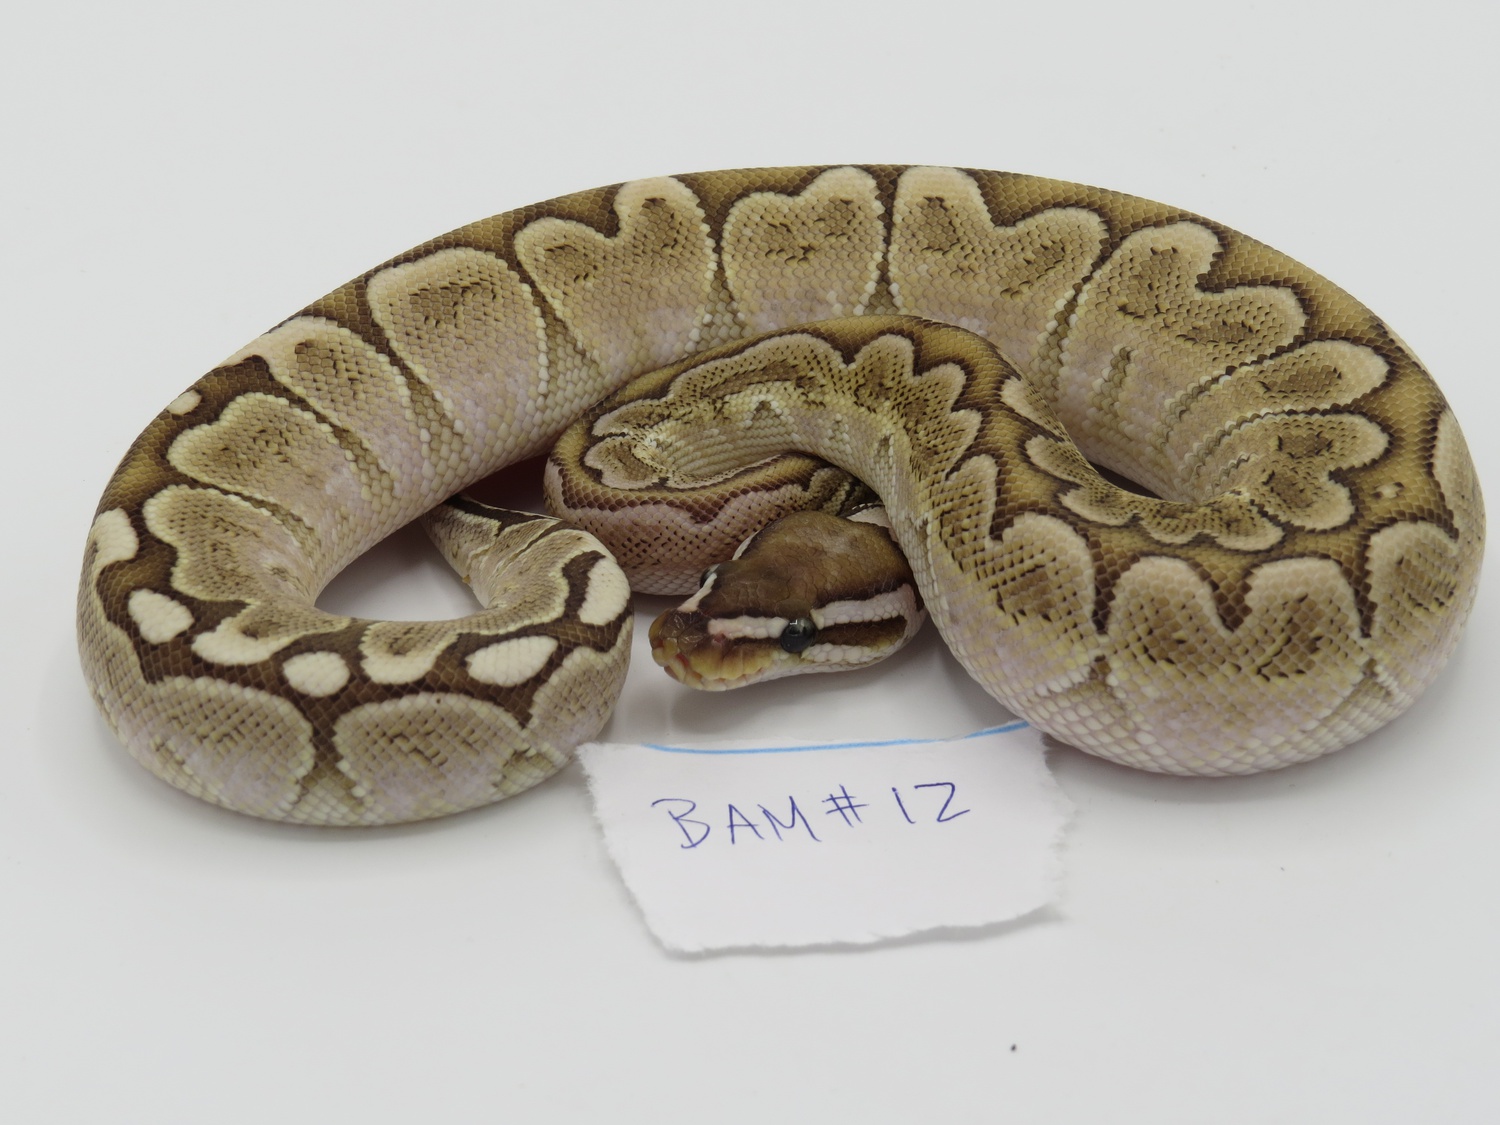 Bamboo Ball Python by Supreme Exotic Feed Co.